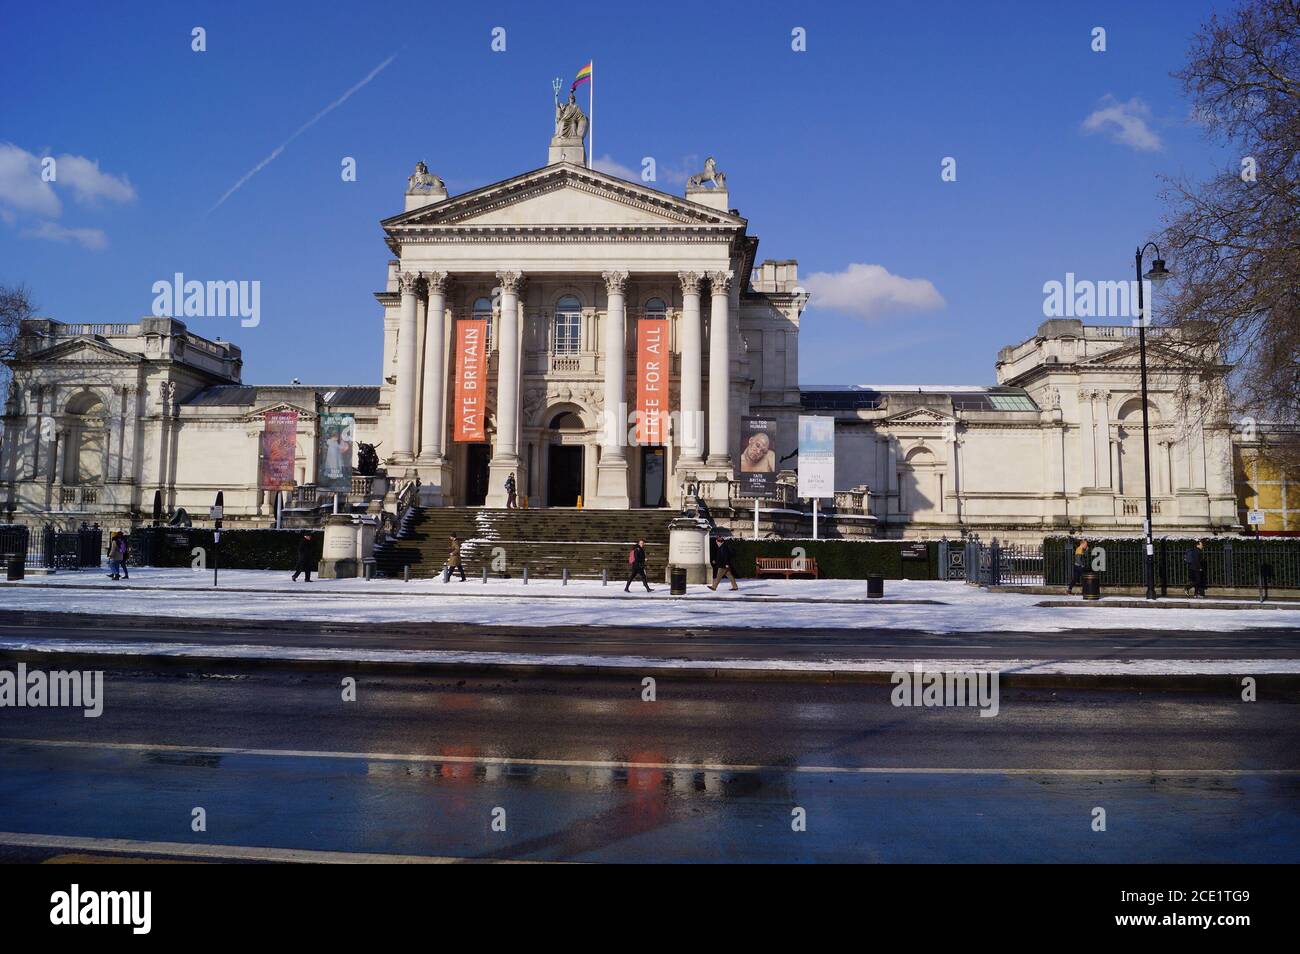 London, UK: a view of Tate Britain art gallery in Millbank, after a snowfall Stock Photo